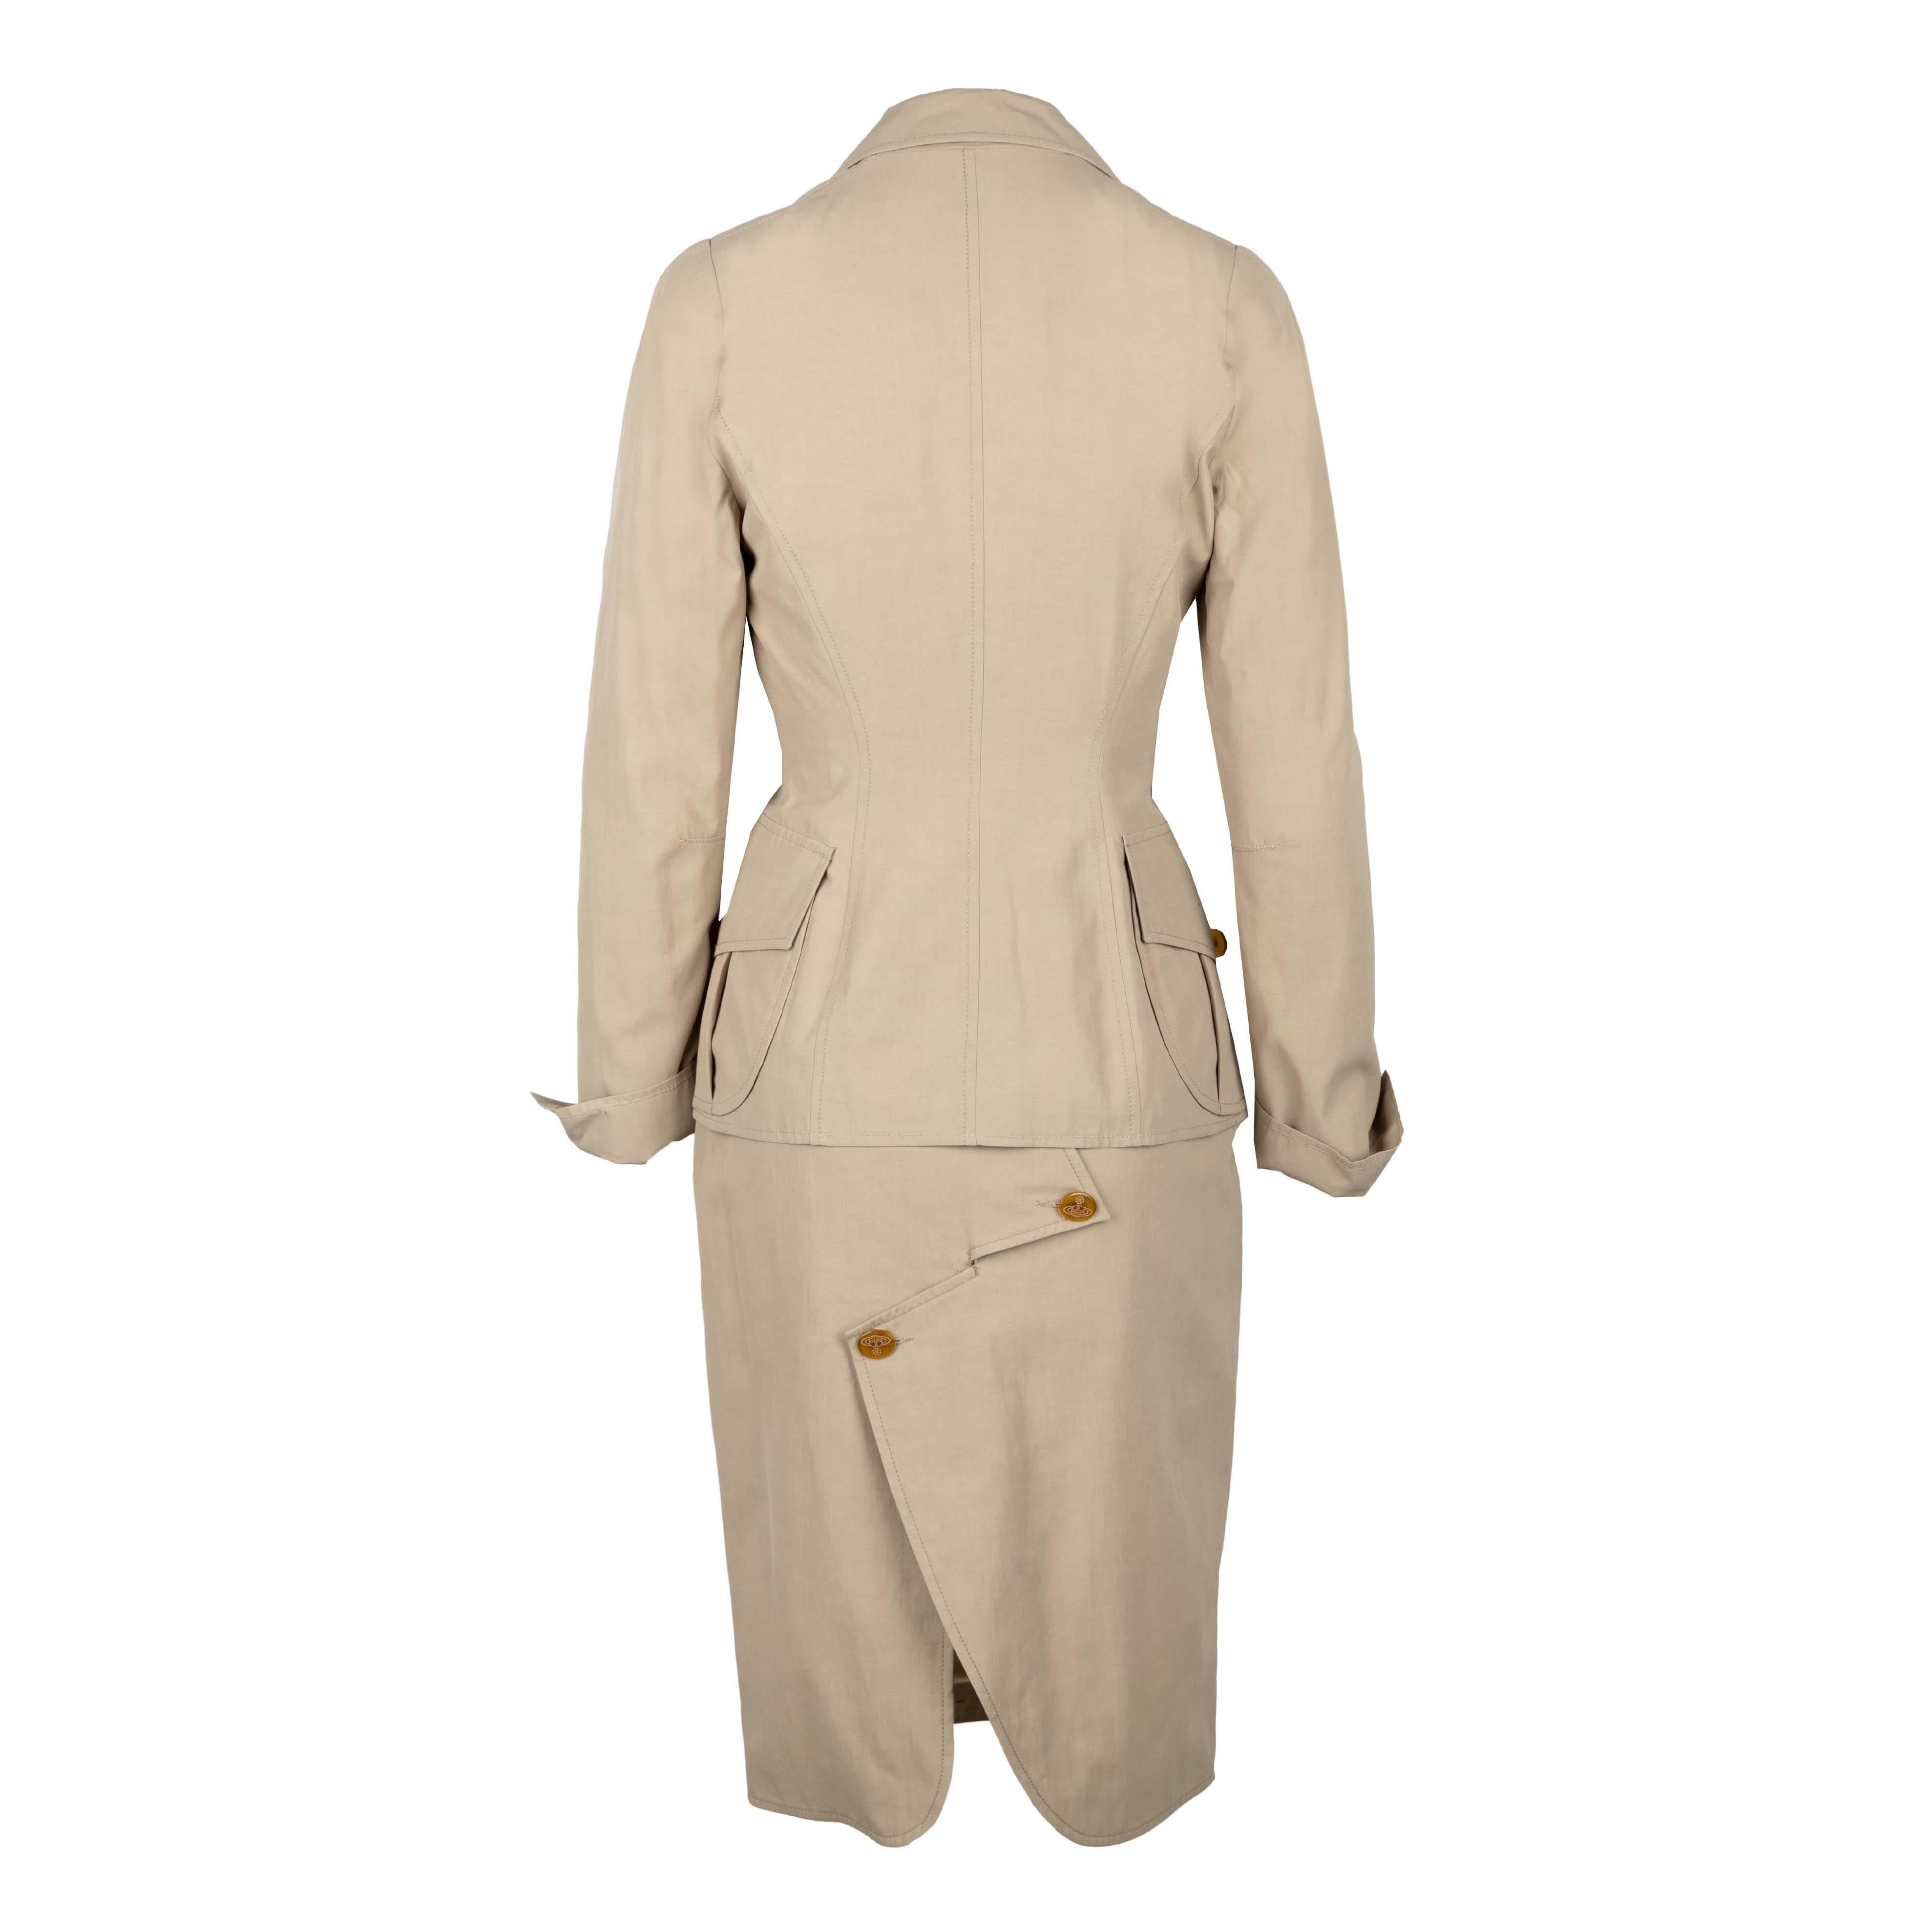 Vivienne Westwood red label jacket and skirt set in beige color, in a similar material of trench coats which makes it perfect for the mid-season use. The jacket has roomy front pockets, features a zigzag styled opening with orange buttons embossed